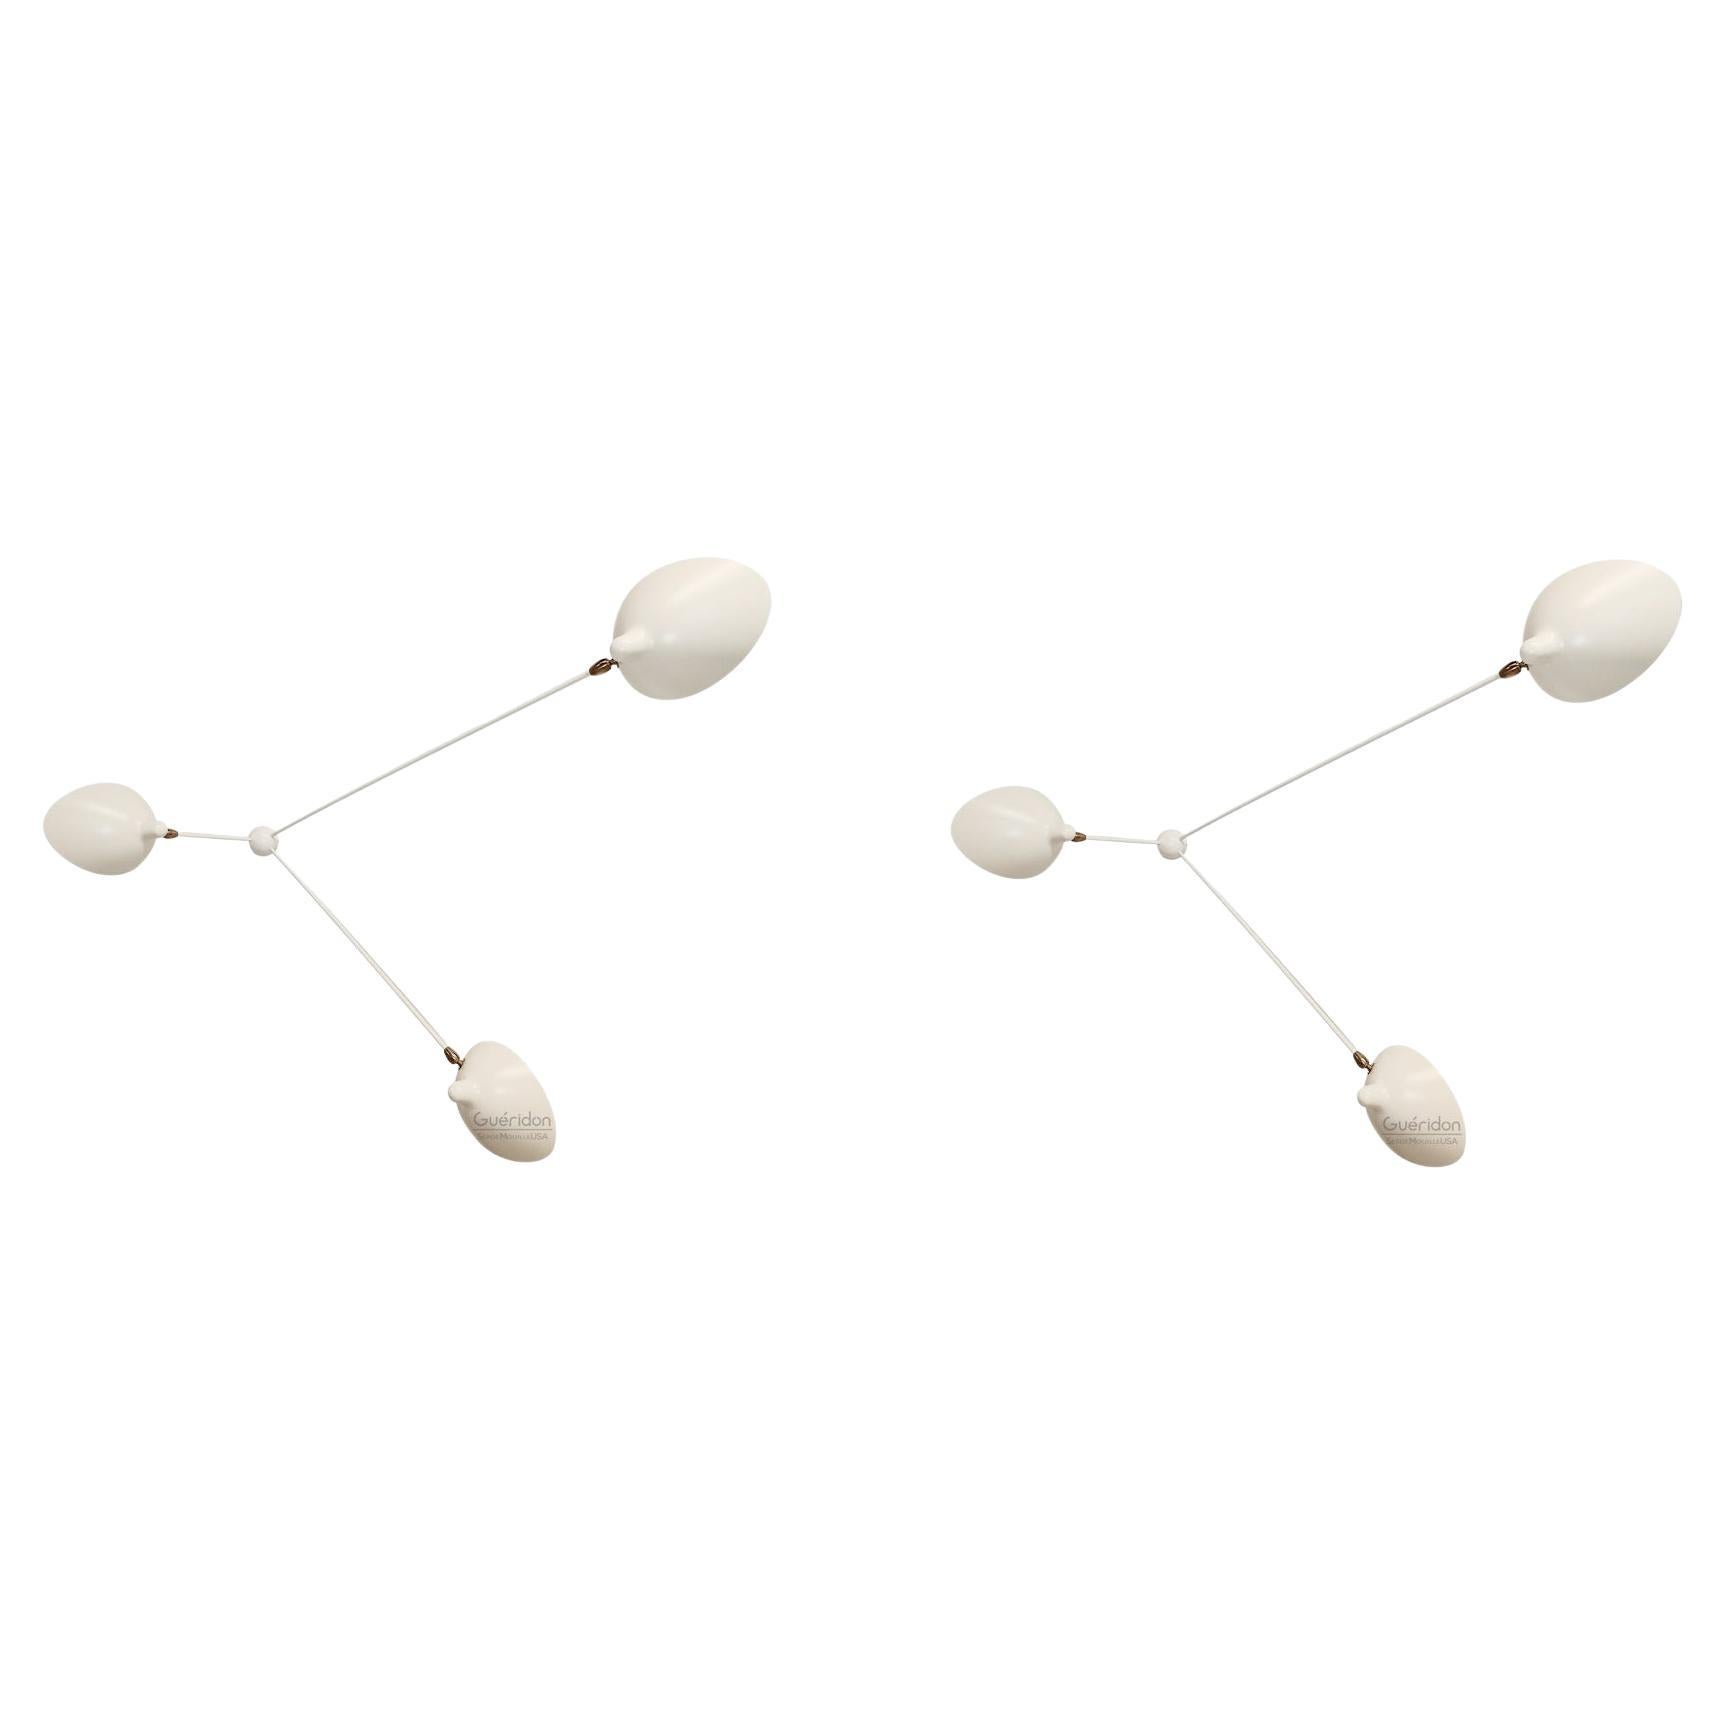 Serge Mouille - Pair of 3-Arm Spider Sconces in White - IN STOCK!